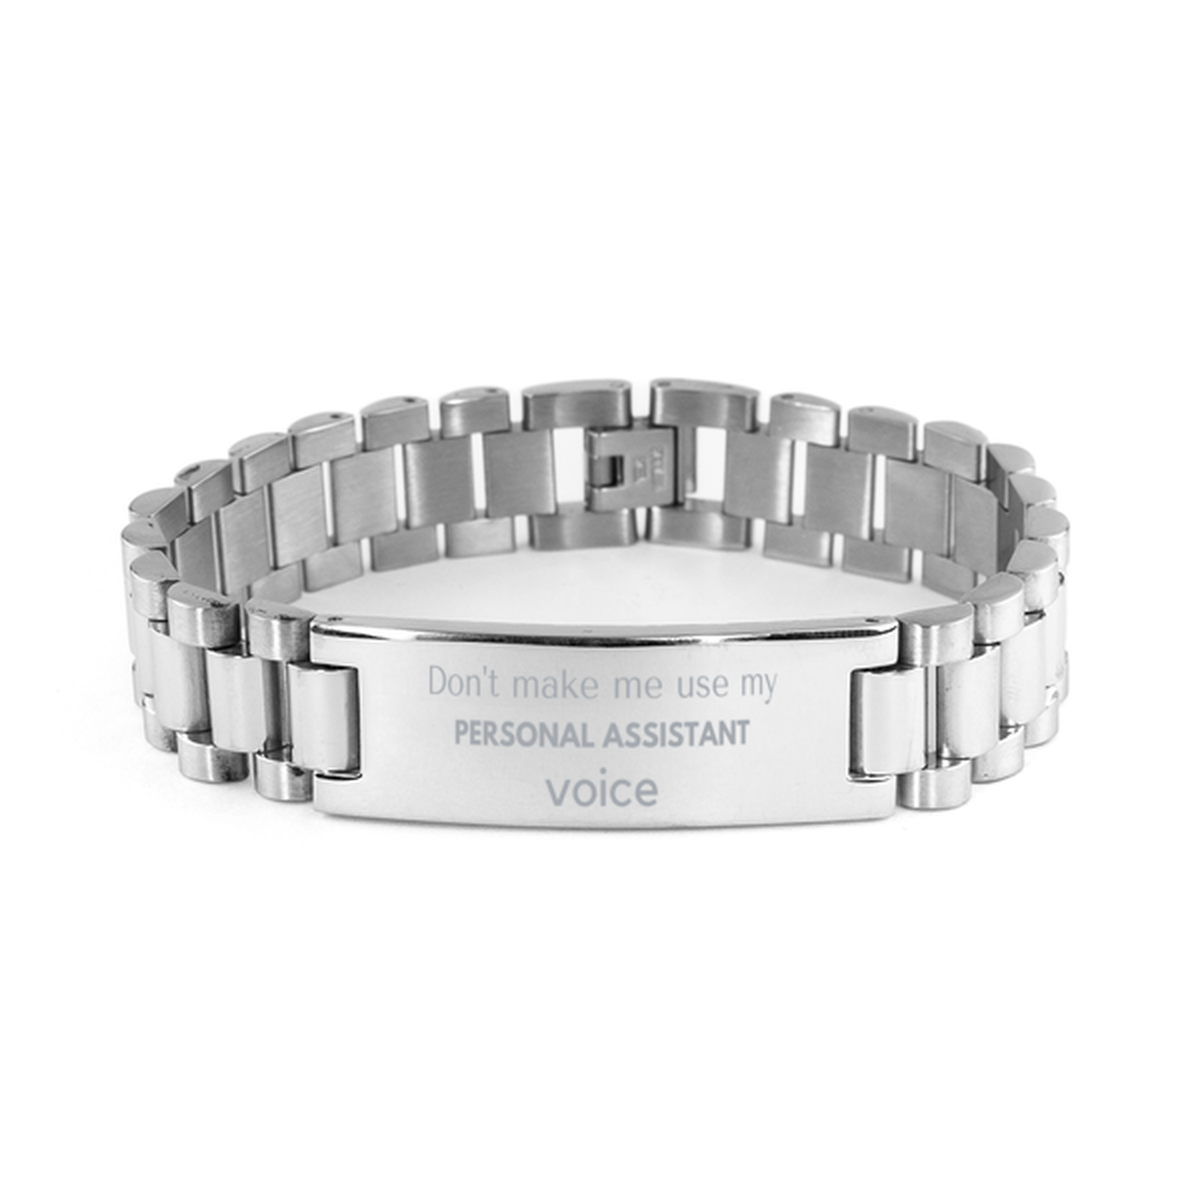 Don't make me use my Personal Assistant voice, Sarcasm Personal Assistant Gifts, Christmas Personal Assistant Ladder Stainless Steel Bracelet Birthday Unique Gifts For Personal Assistant Coworkers, Men, Women, Colleague, Friends